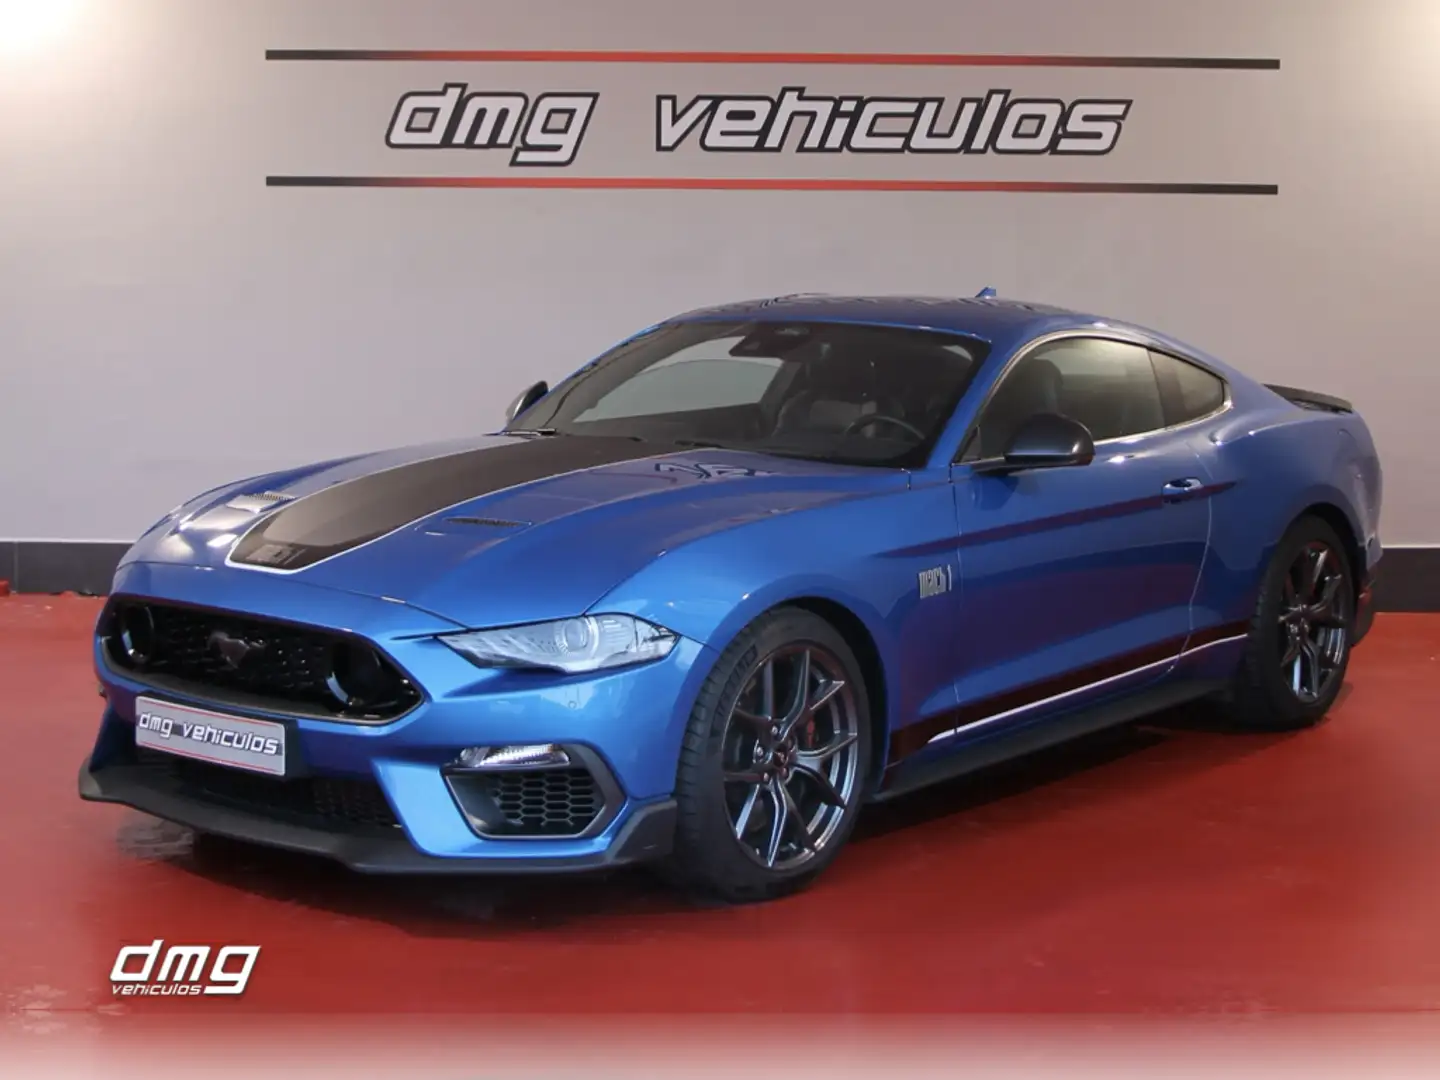 Ford Mustang Fastback 5.0 Ti-VCT Mach I Aut. - 2